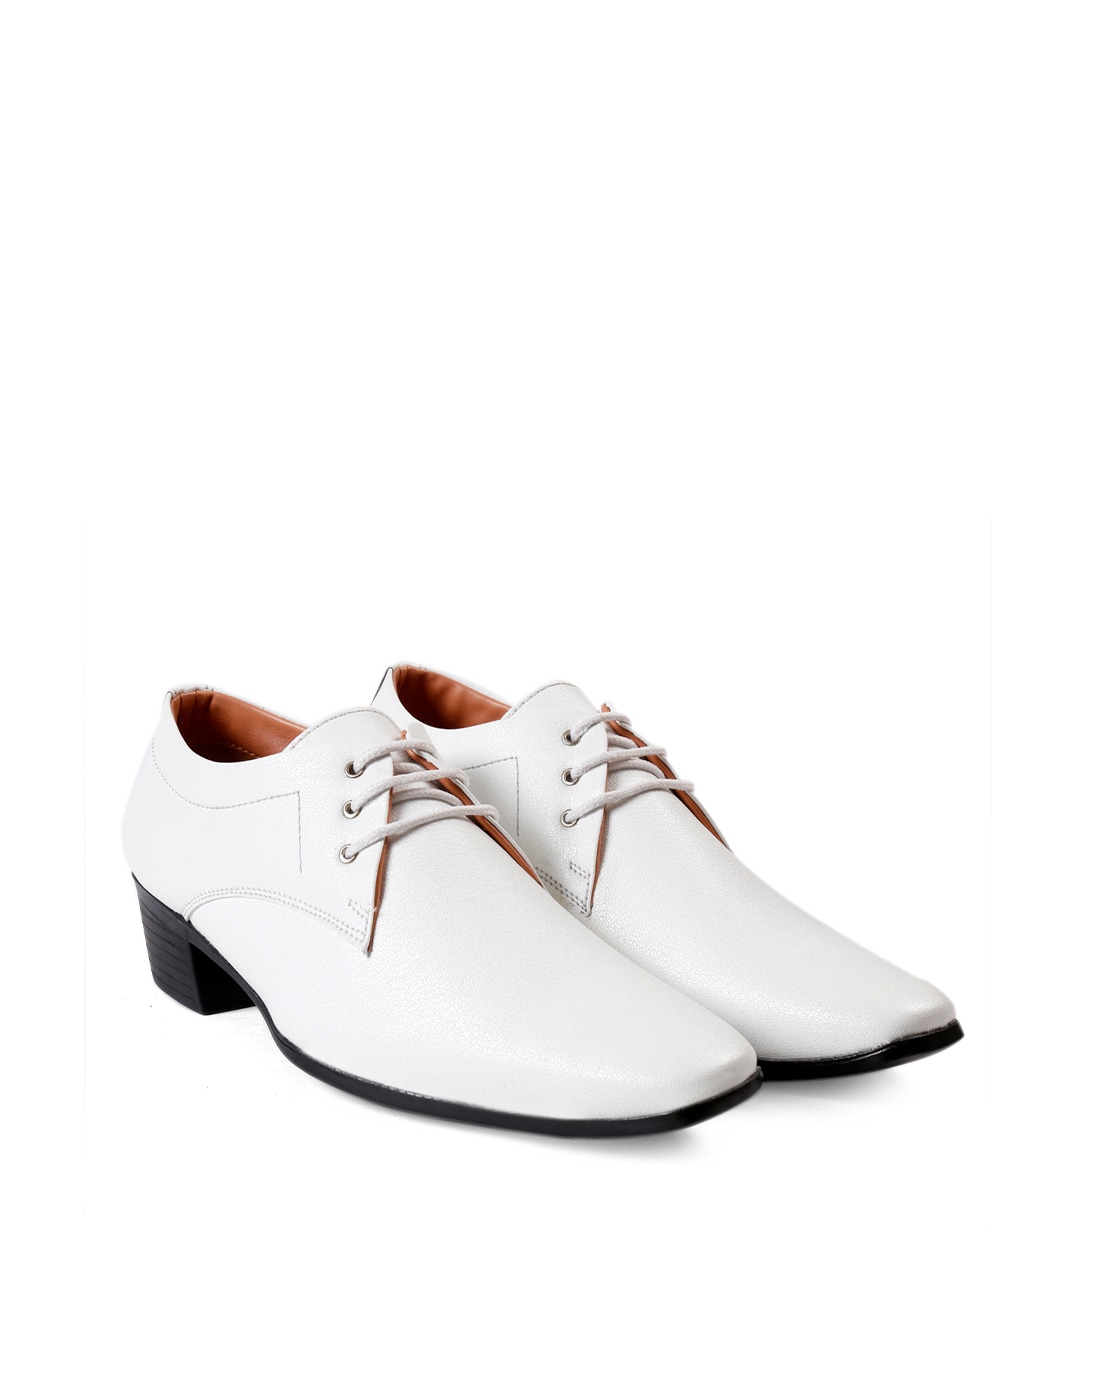 Altama O2 Men's White Leather Dress Oxford | Oxfords | Military - Shop Your  Navy Exchange - Official Site